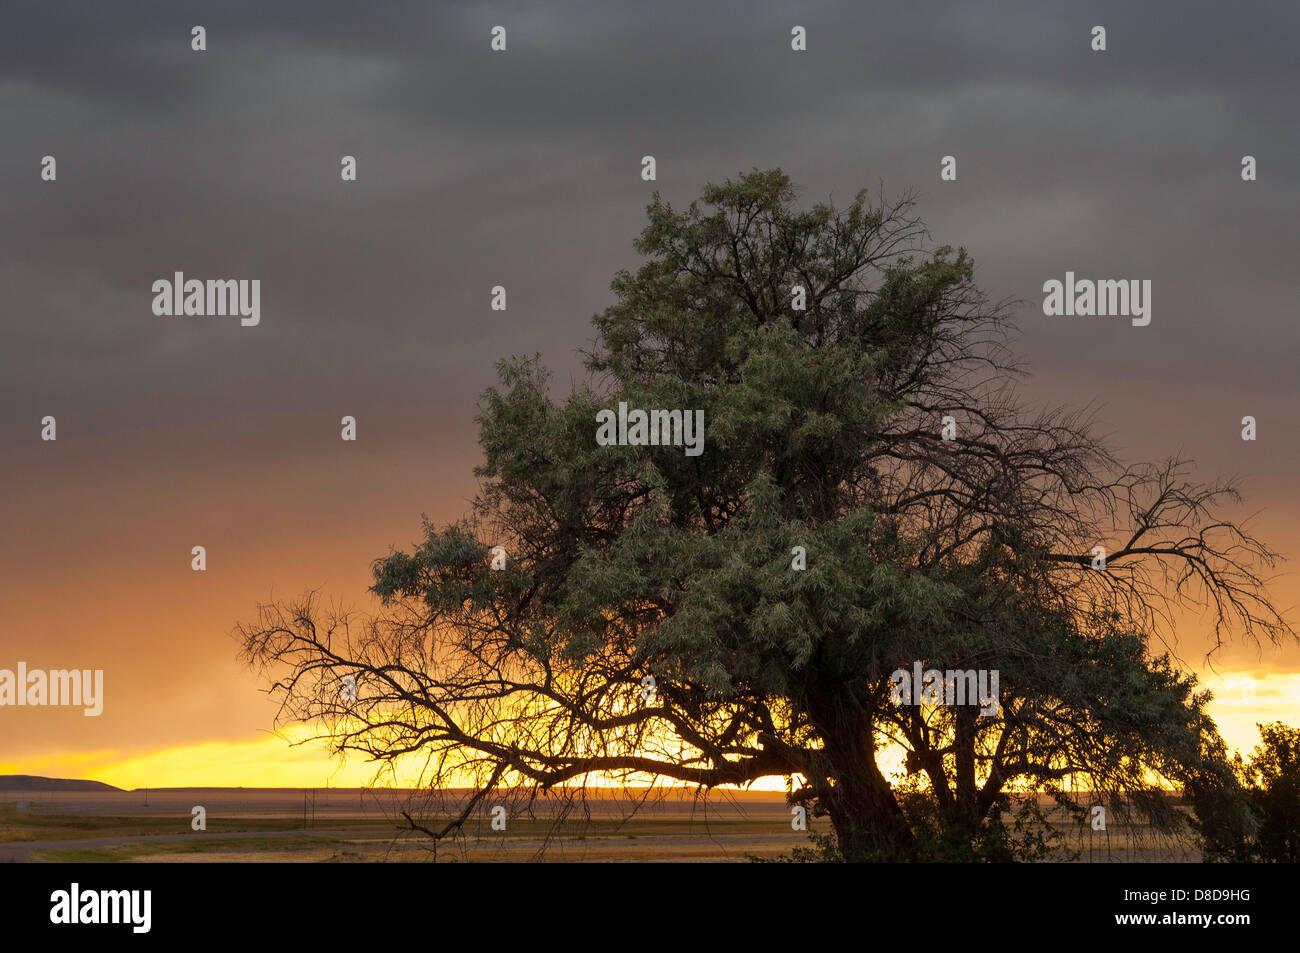 A storm brews over a Russian olive tree north of Great Falls, Mont. Stock Photo